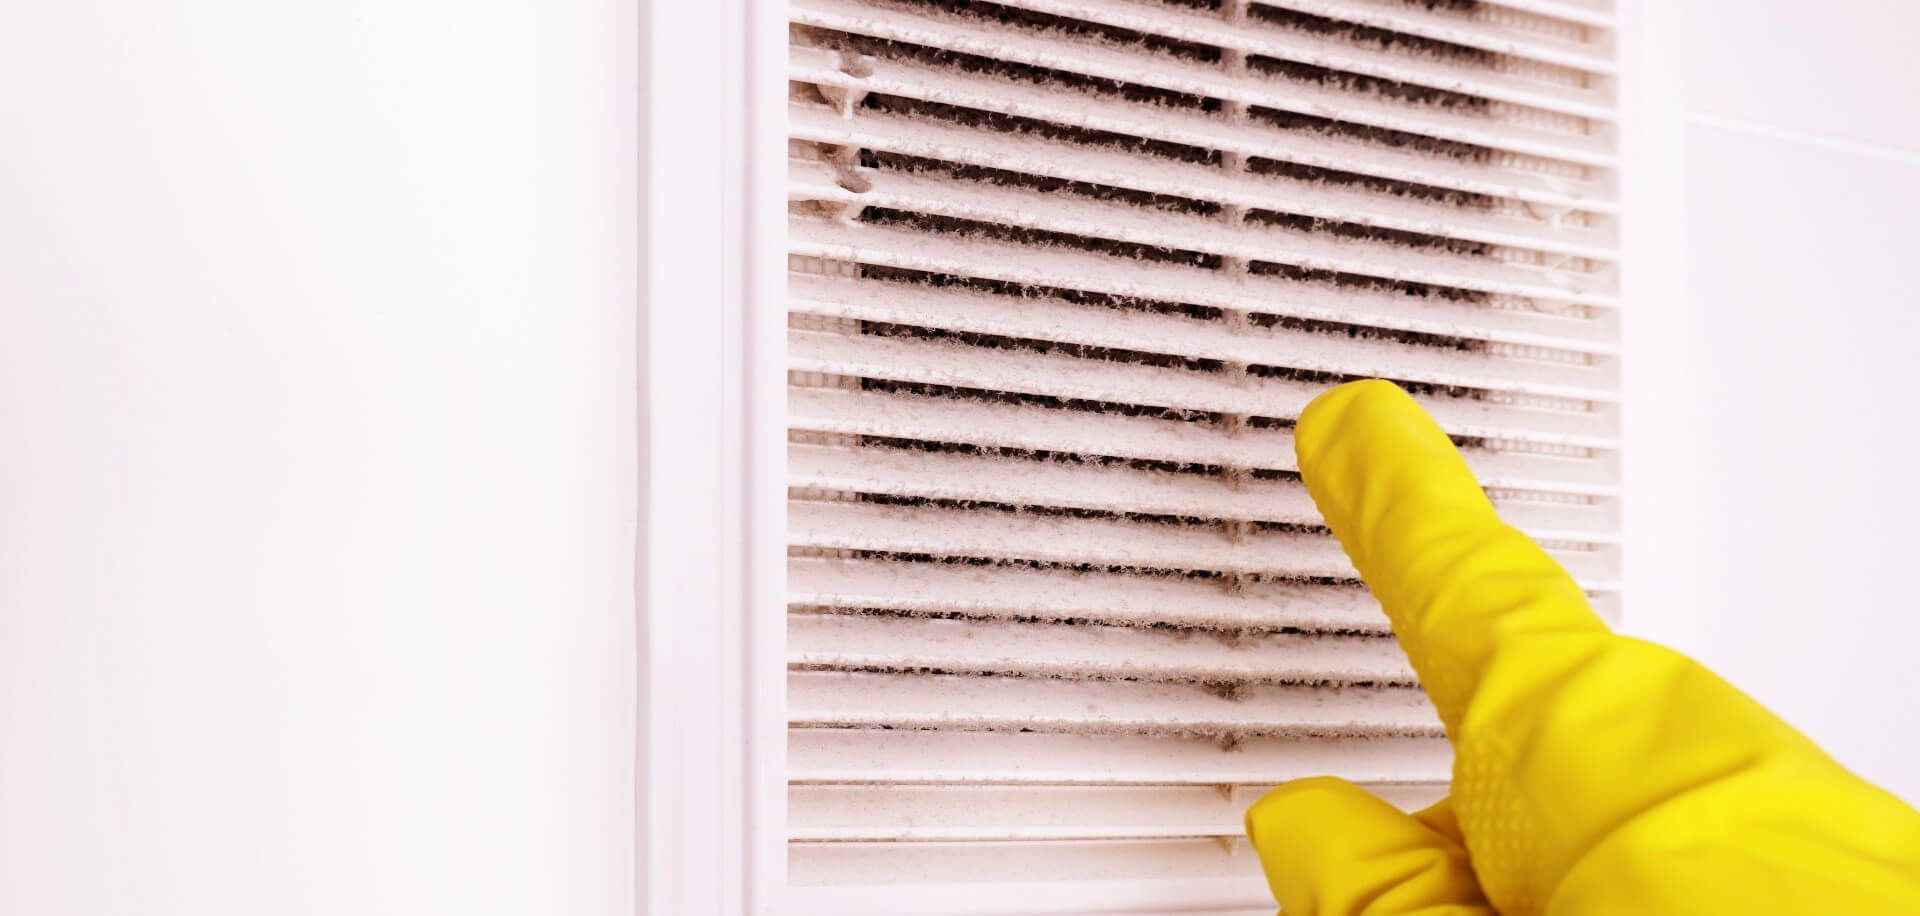 A hand wearing a yellow rubber glove pointing at a dirty air vent